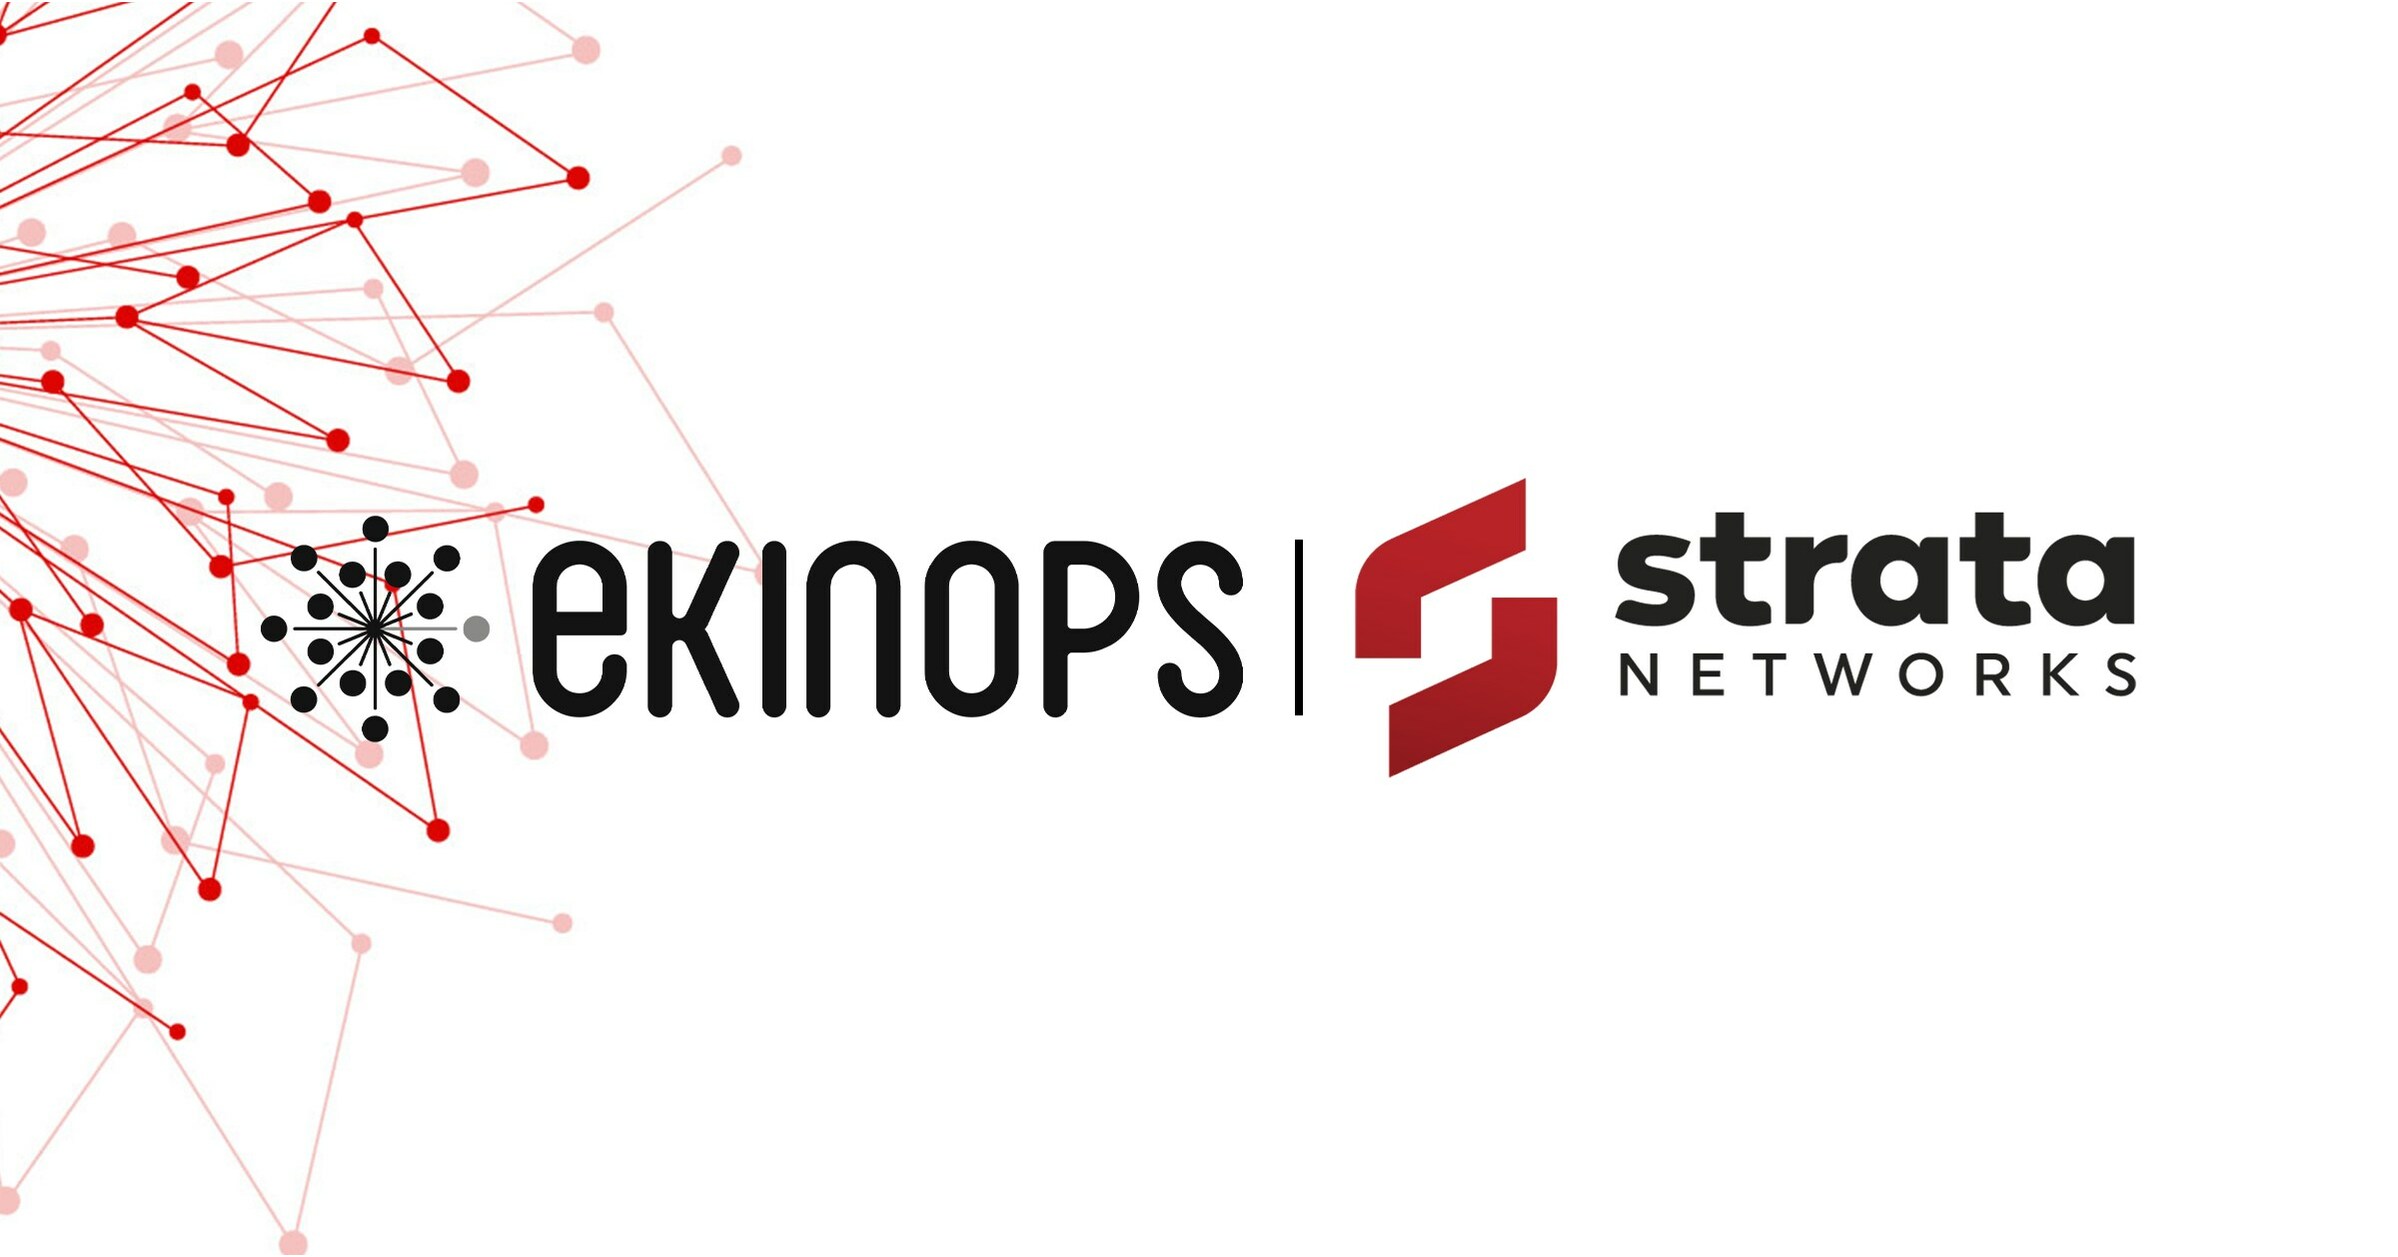 Ekinops Selected by Strata Networks for System-wide Upgrade